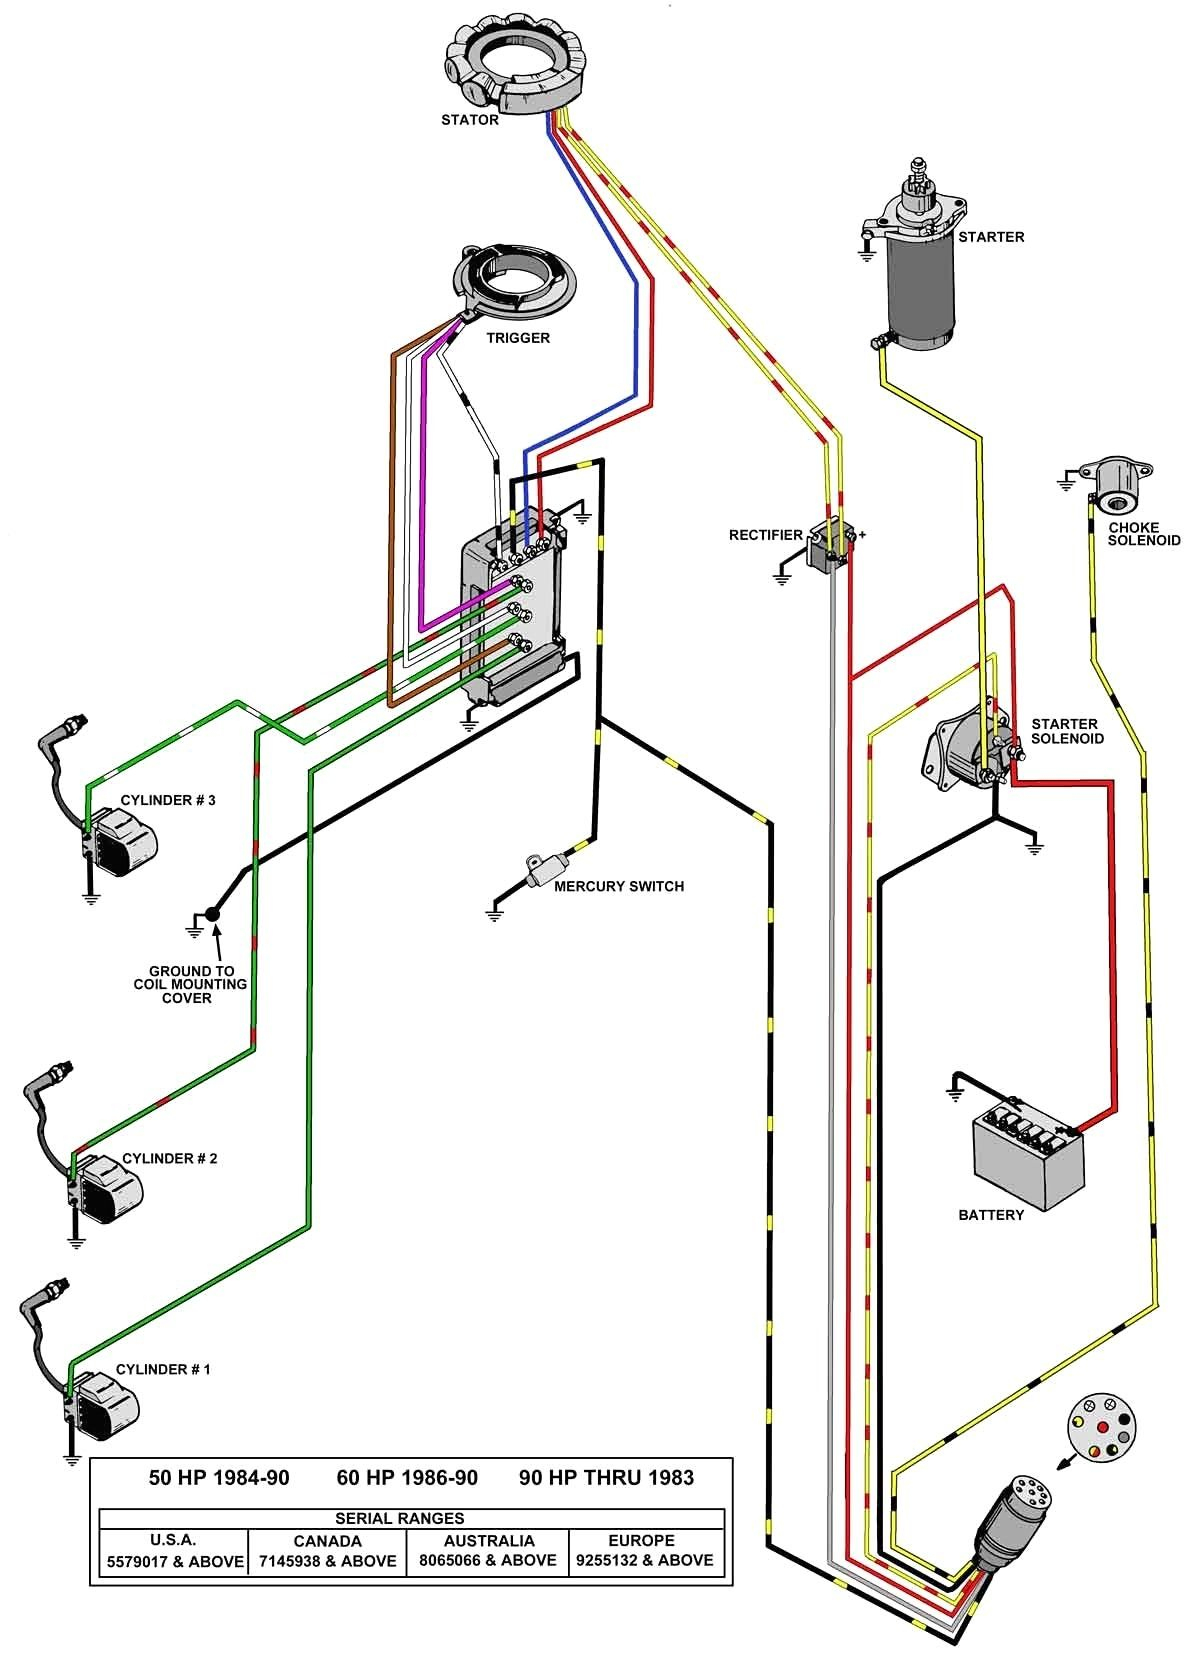 Ignition Switch Wiring Diagrams - Today Wiring Diagram - Mtd Ignition Switch Wiring Diagram